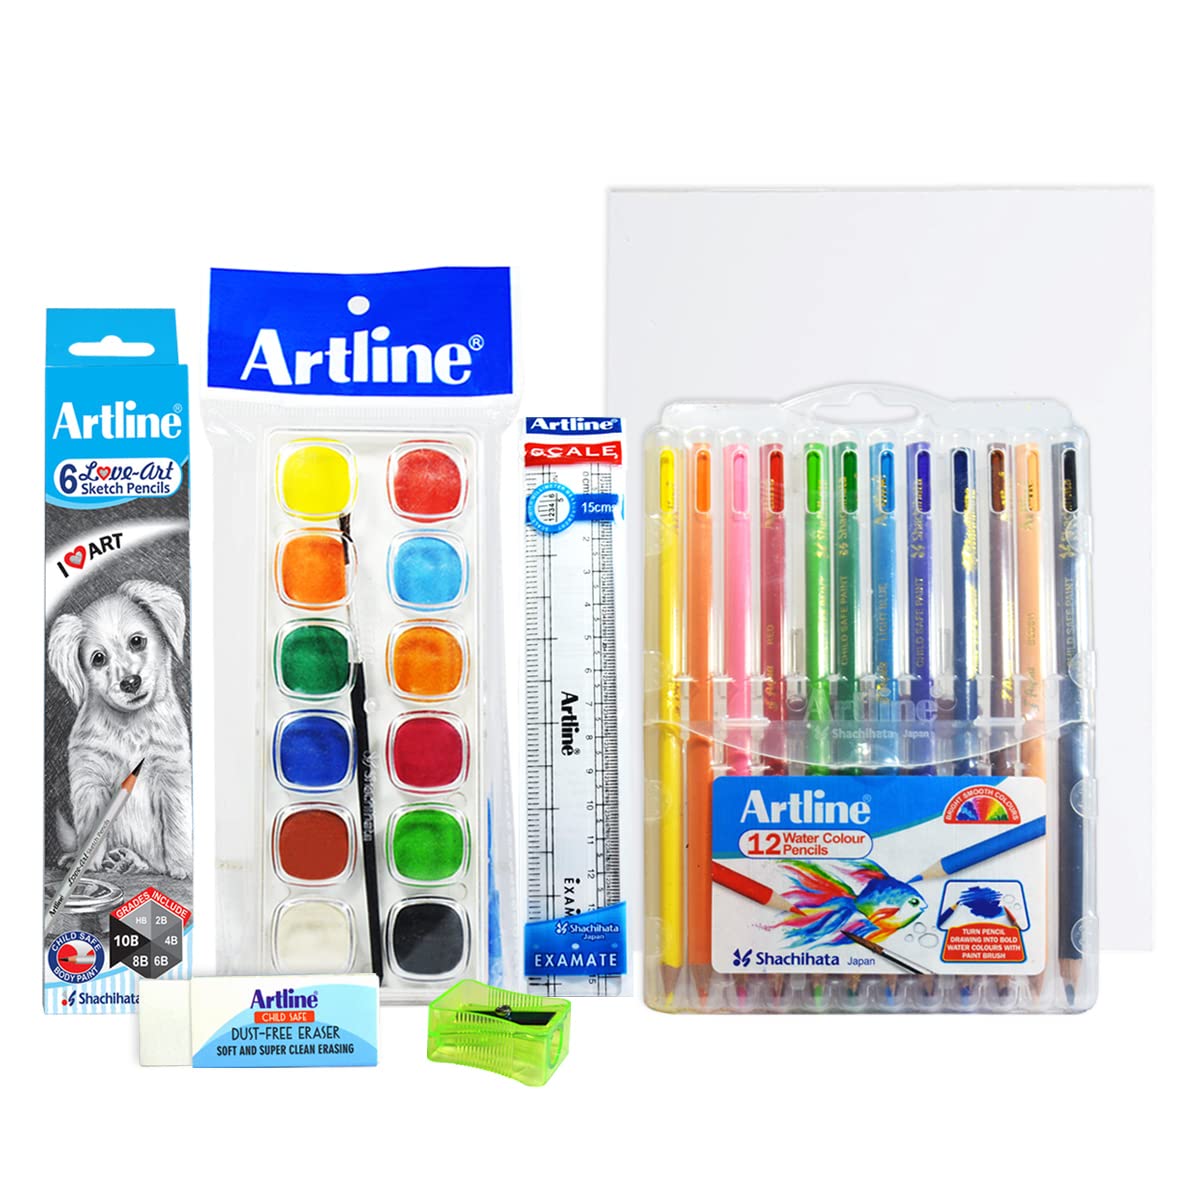 Artline Painting Kit | Drawing Stationery Kit | Free Watercolor Paper | 7 Assorted Items